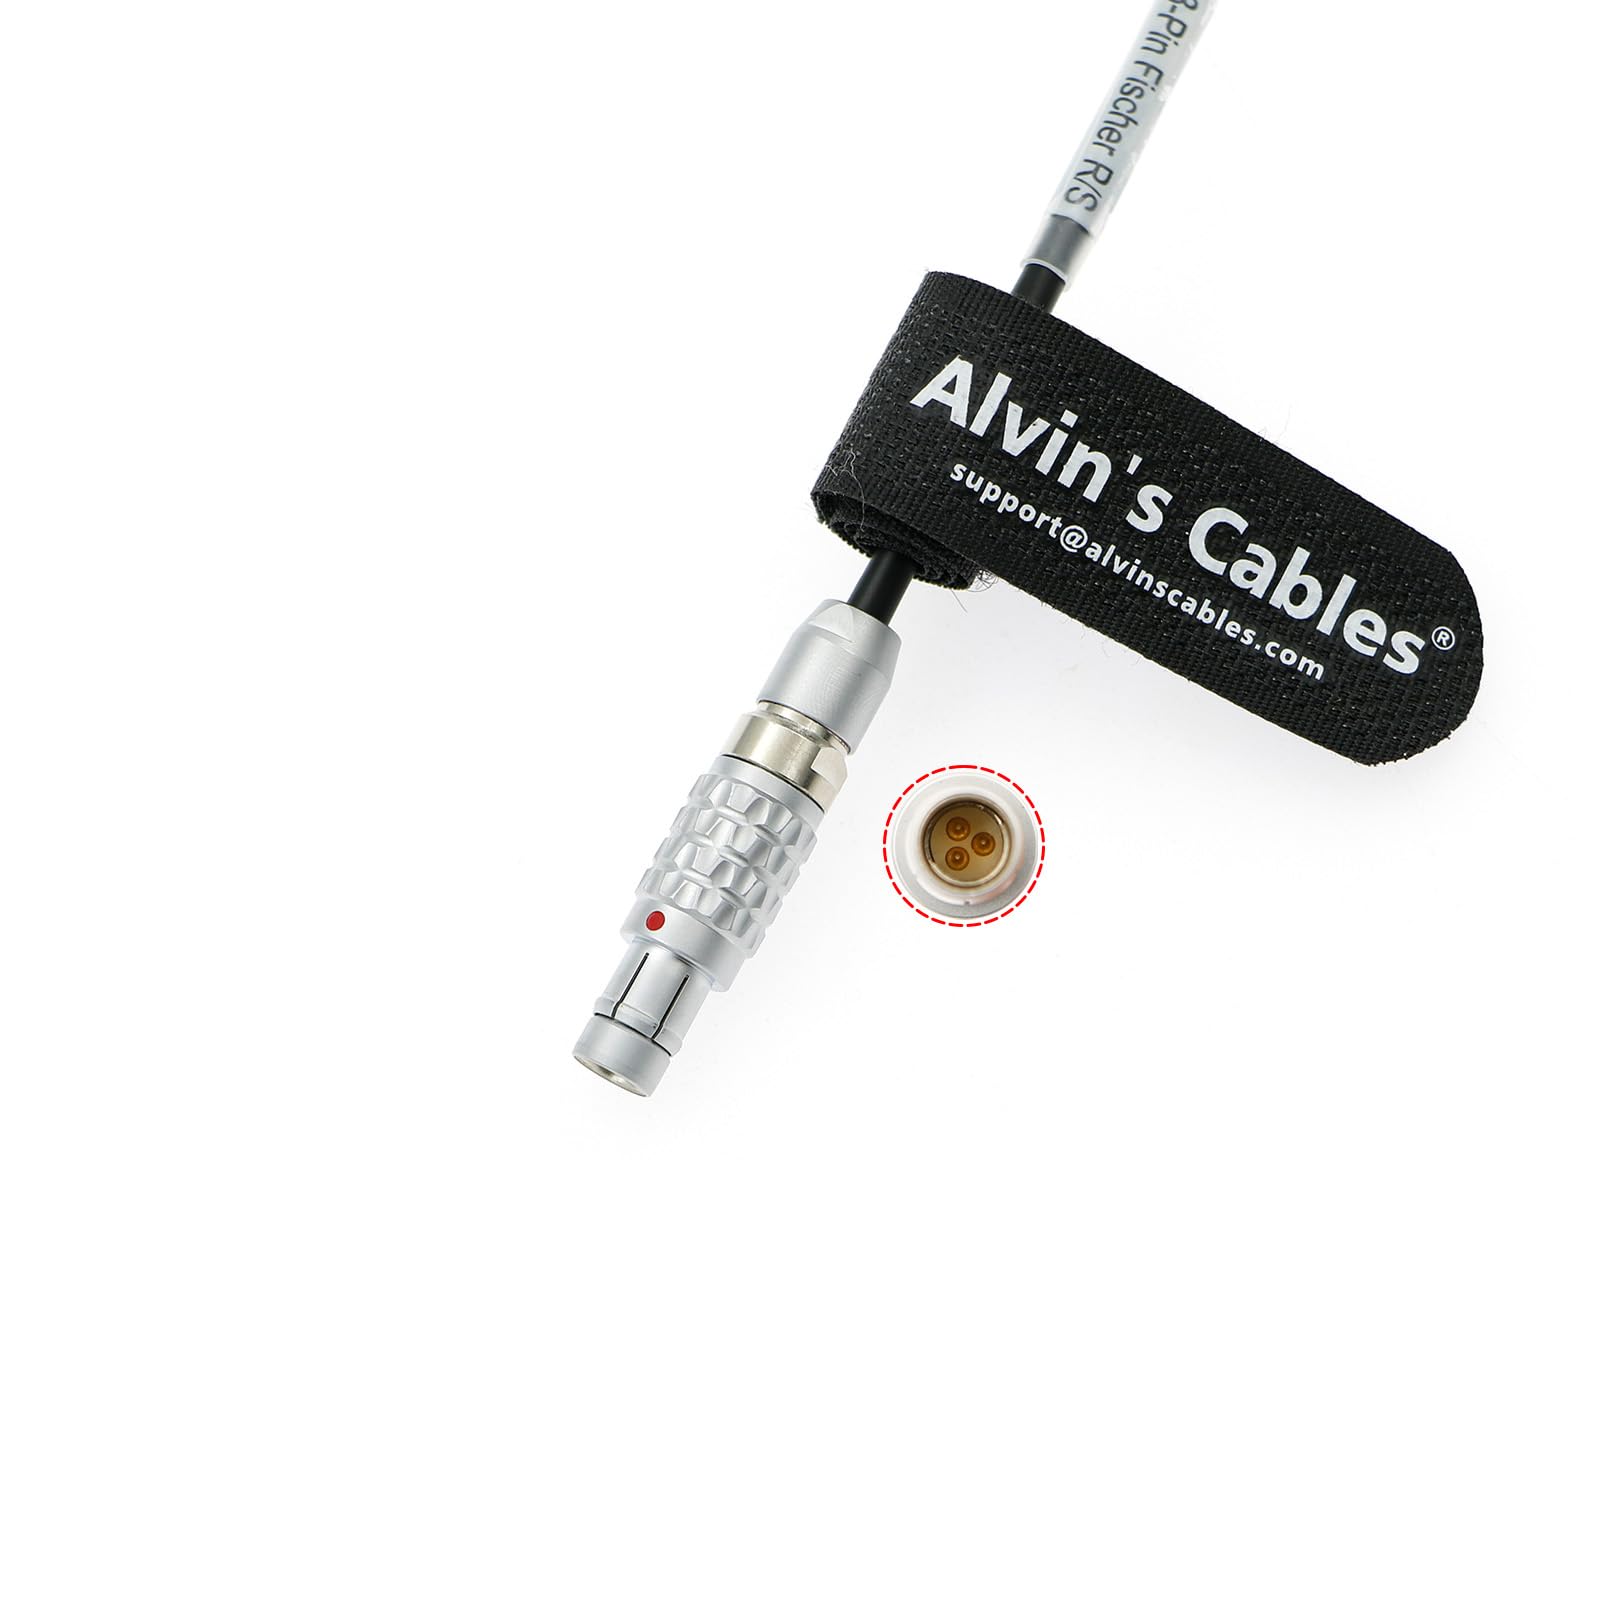 Alvin's Cables Nucleus-Nano II Motor Run Stop Cable for Tilta for Arri Alexa 35| Mini LF| LF| SXT| XT| Amira Cameras Fischer 3 Pin to Right Angle USB-C Type-C RS Cable 40cm| 15.7inches